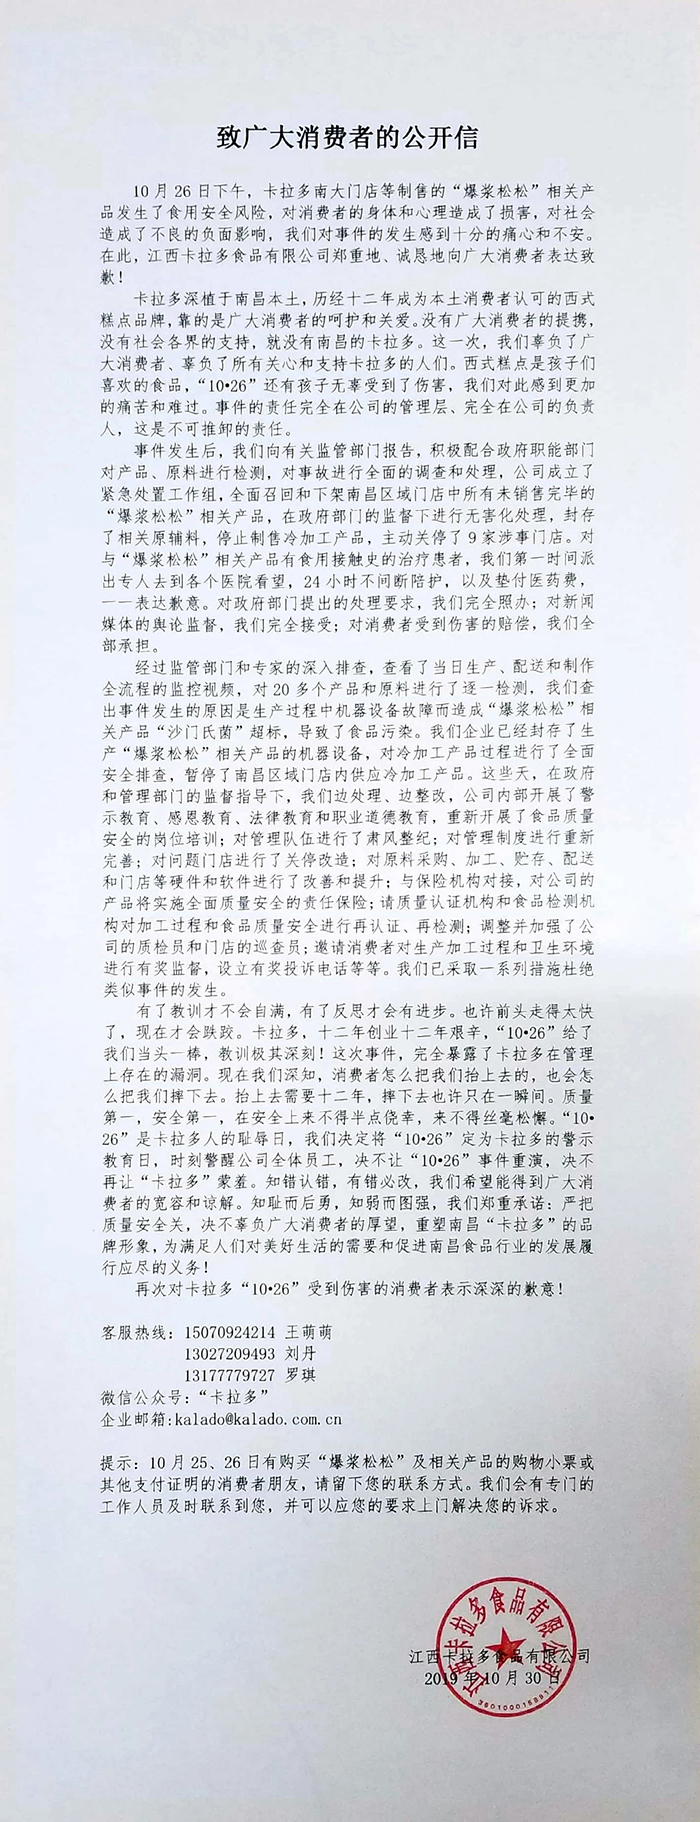 Jiangxi calado Food Co., Ltd. issued an open letter to explain the cause of food poisoning. Source: calado Food Official WeChat